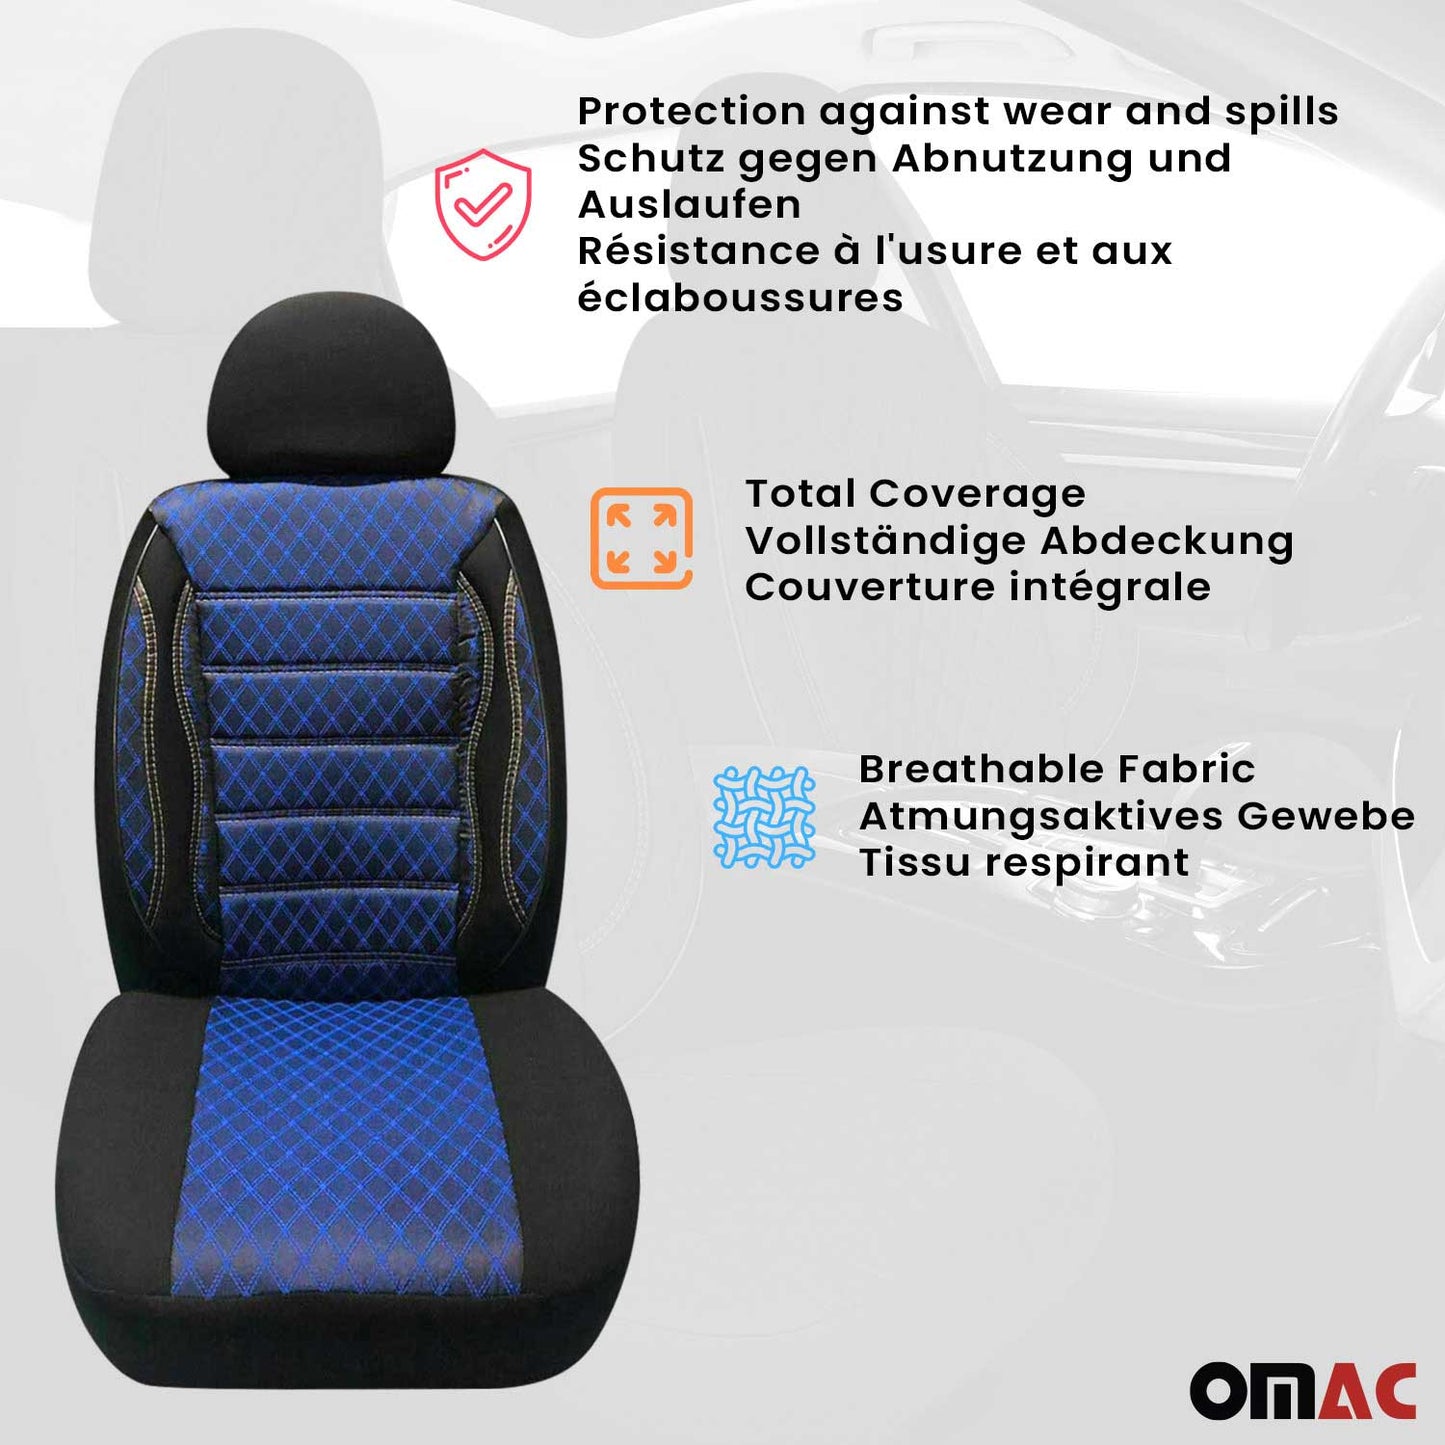 OMAC Front Car Seat Covers for RAM Promaster City 2015-2022 Black & Blue 2+1 A011821